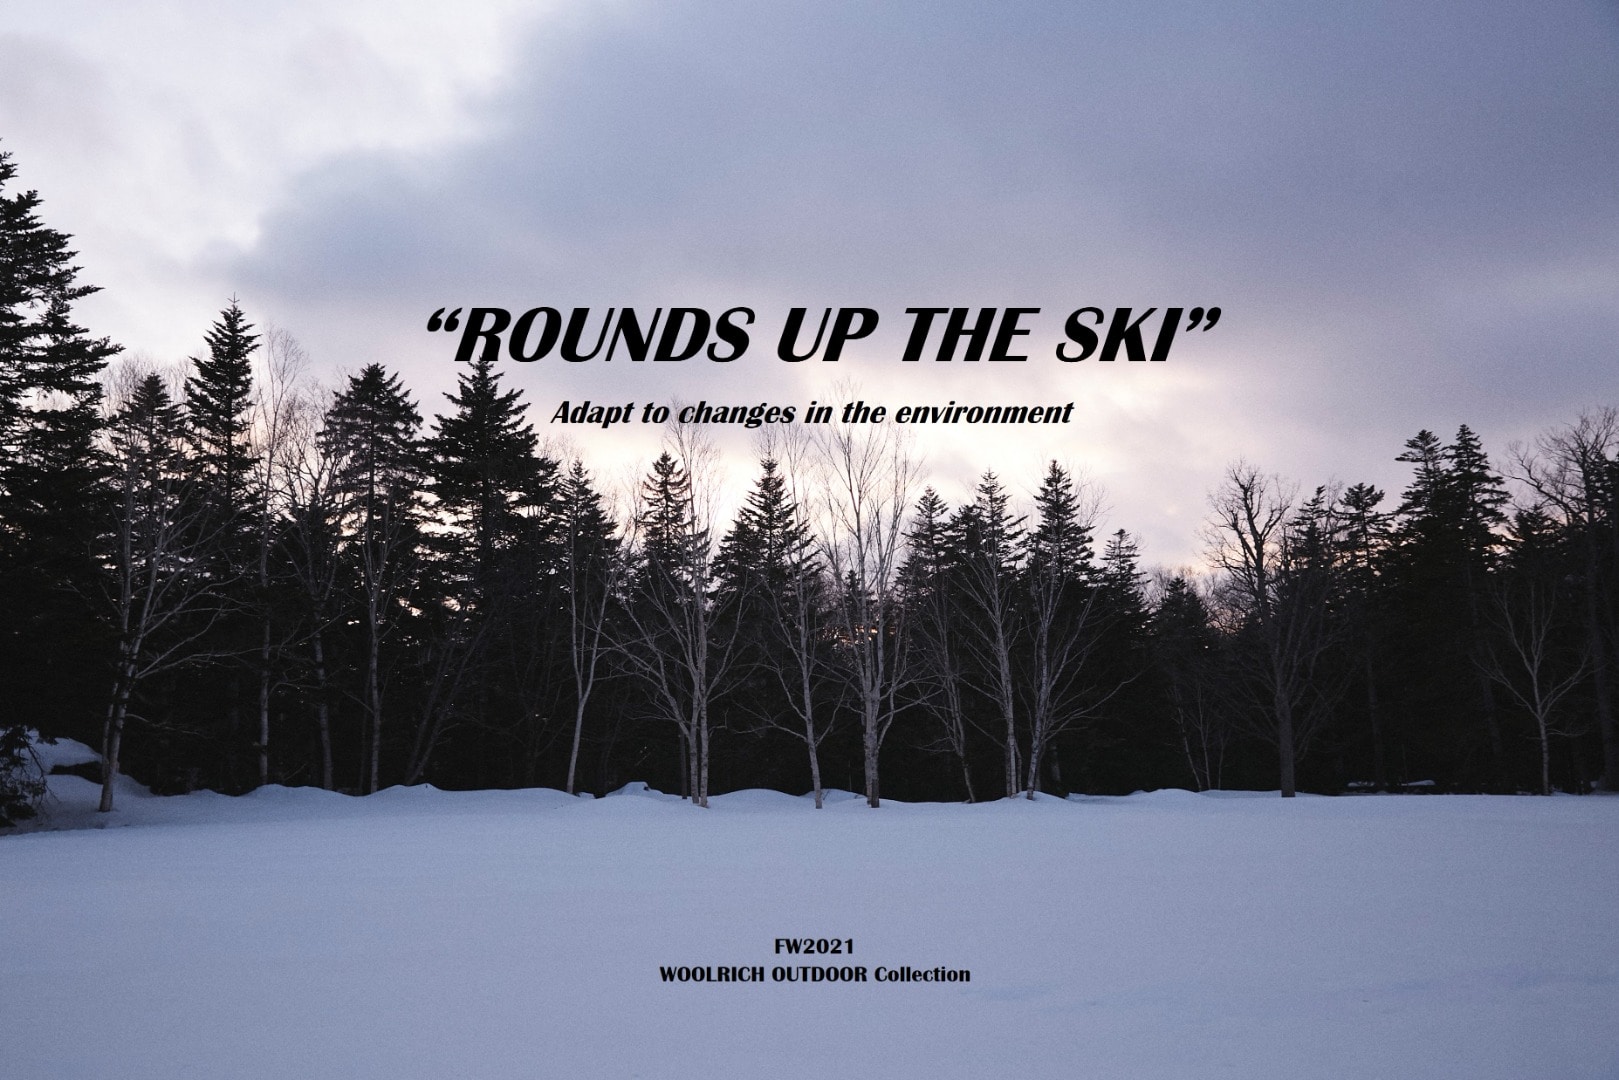 ”ROUNDS UP THE SKI" Adapt to changes in the environment